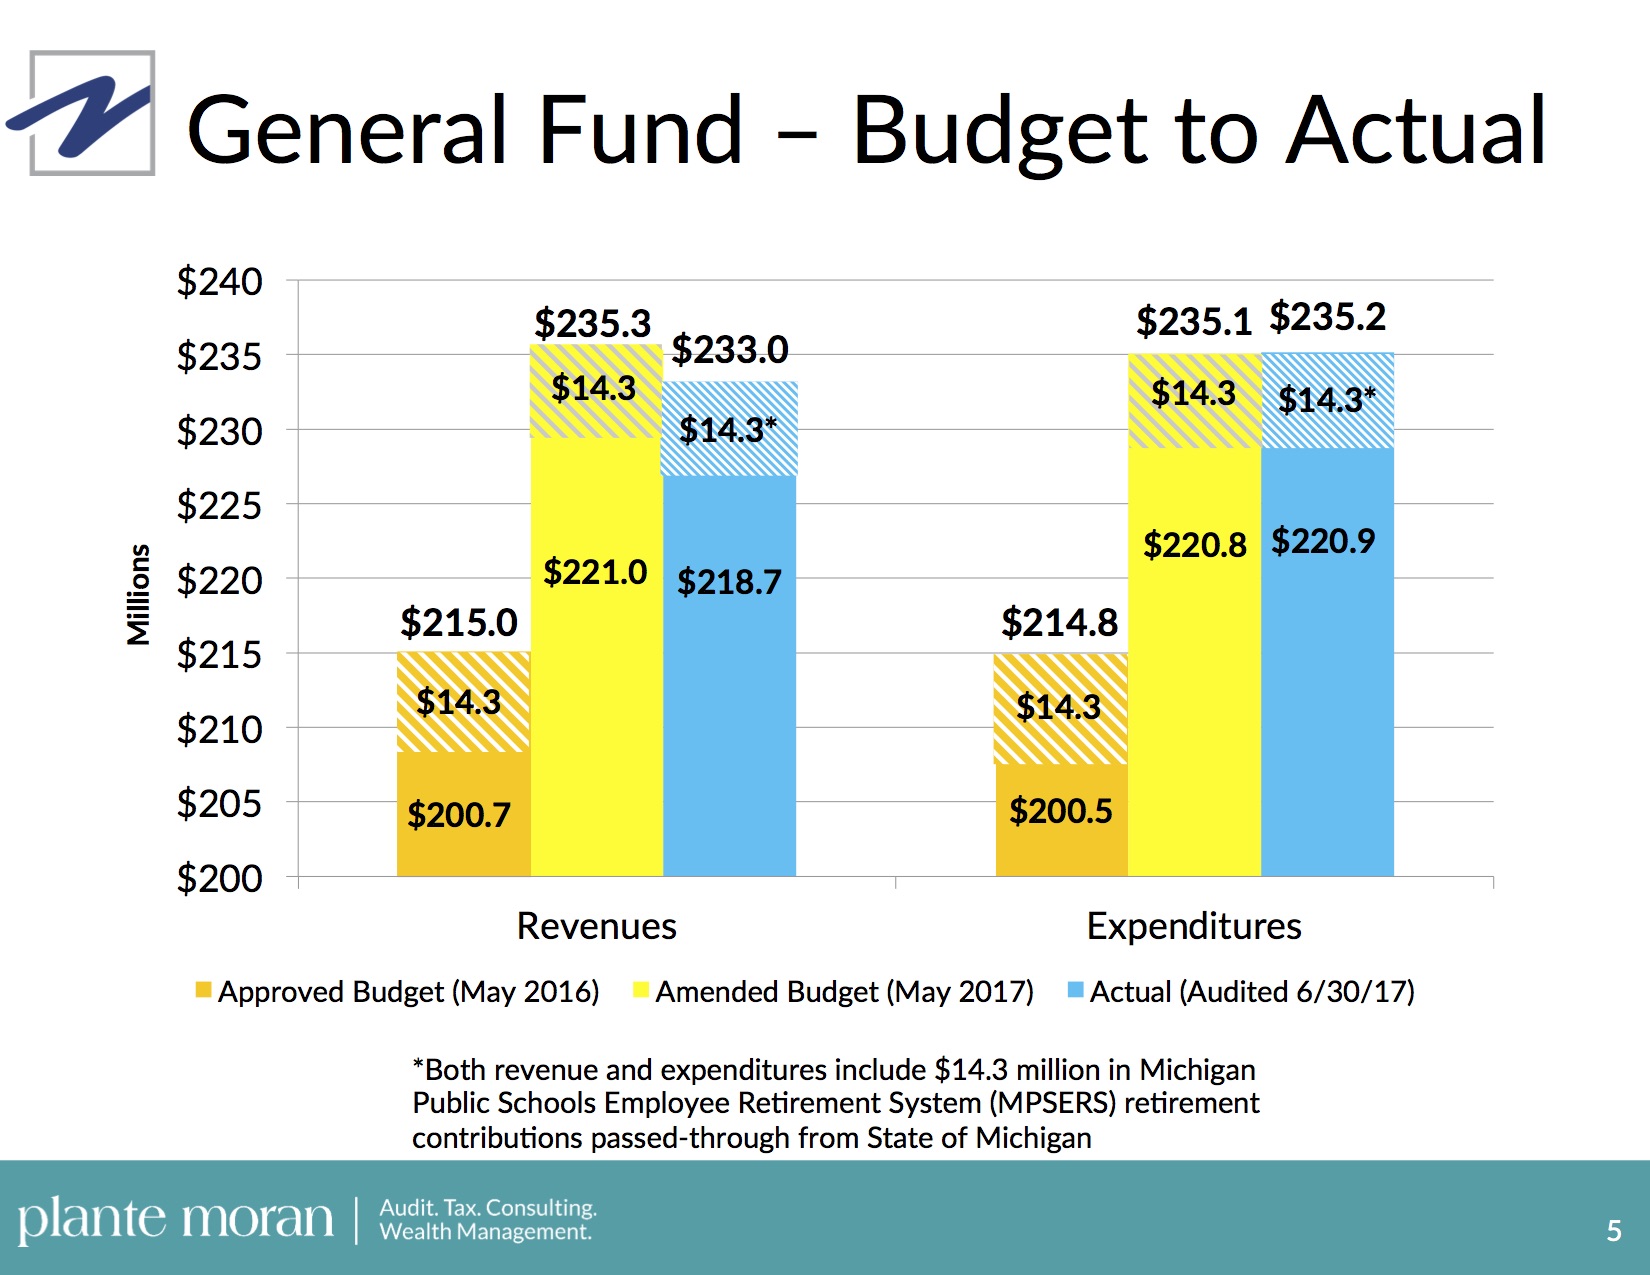 A graph highlighting AAPS Fiscal Year 2017 General Fund Budget to Actual numbers for both revenues and expenses